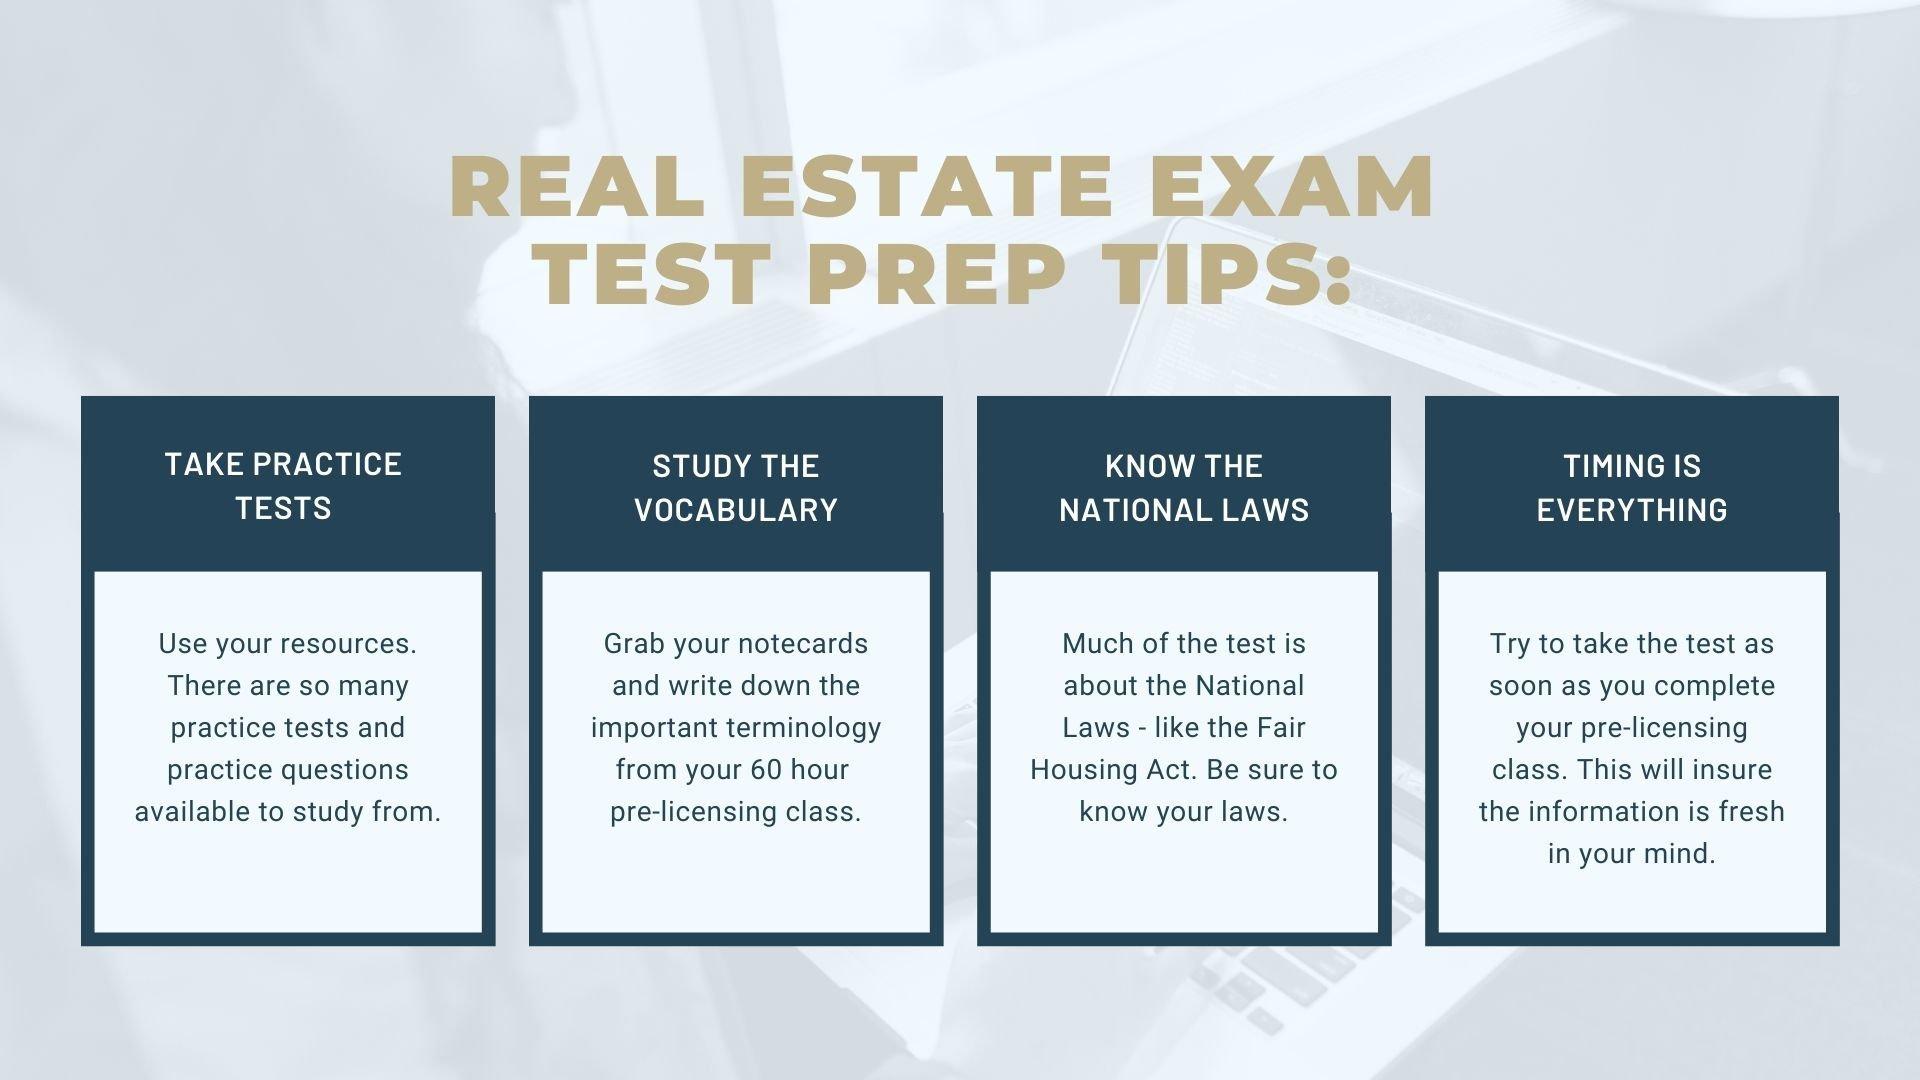 How to prep for real estate exam